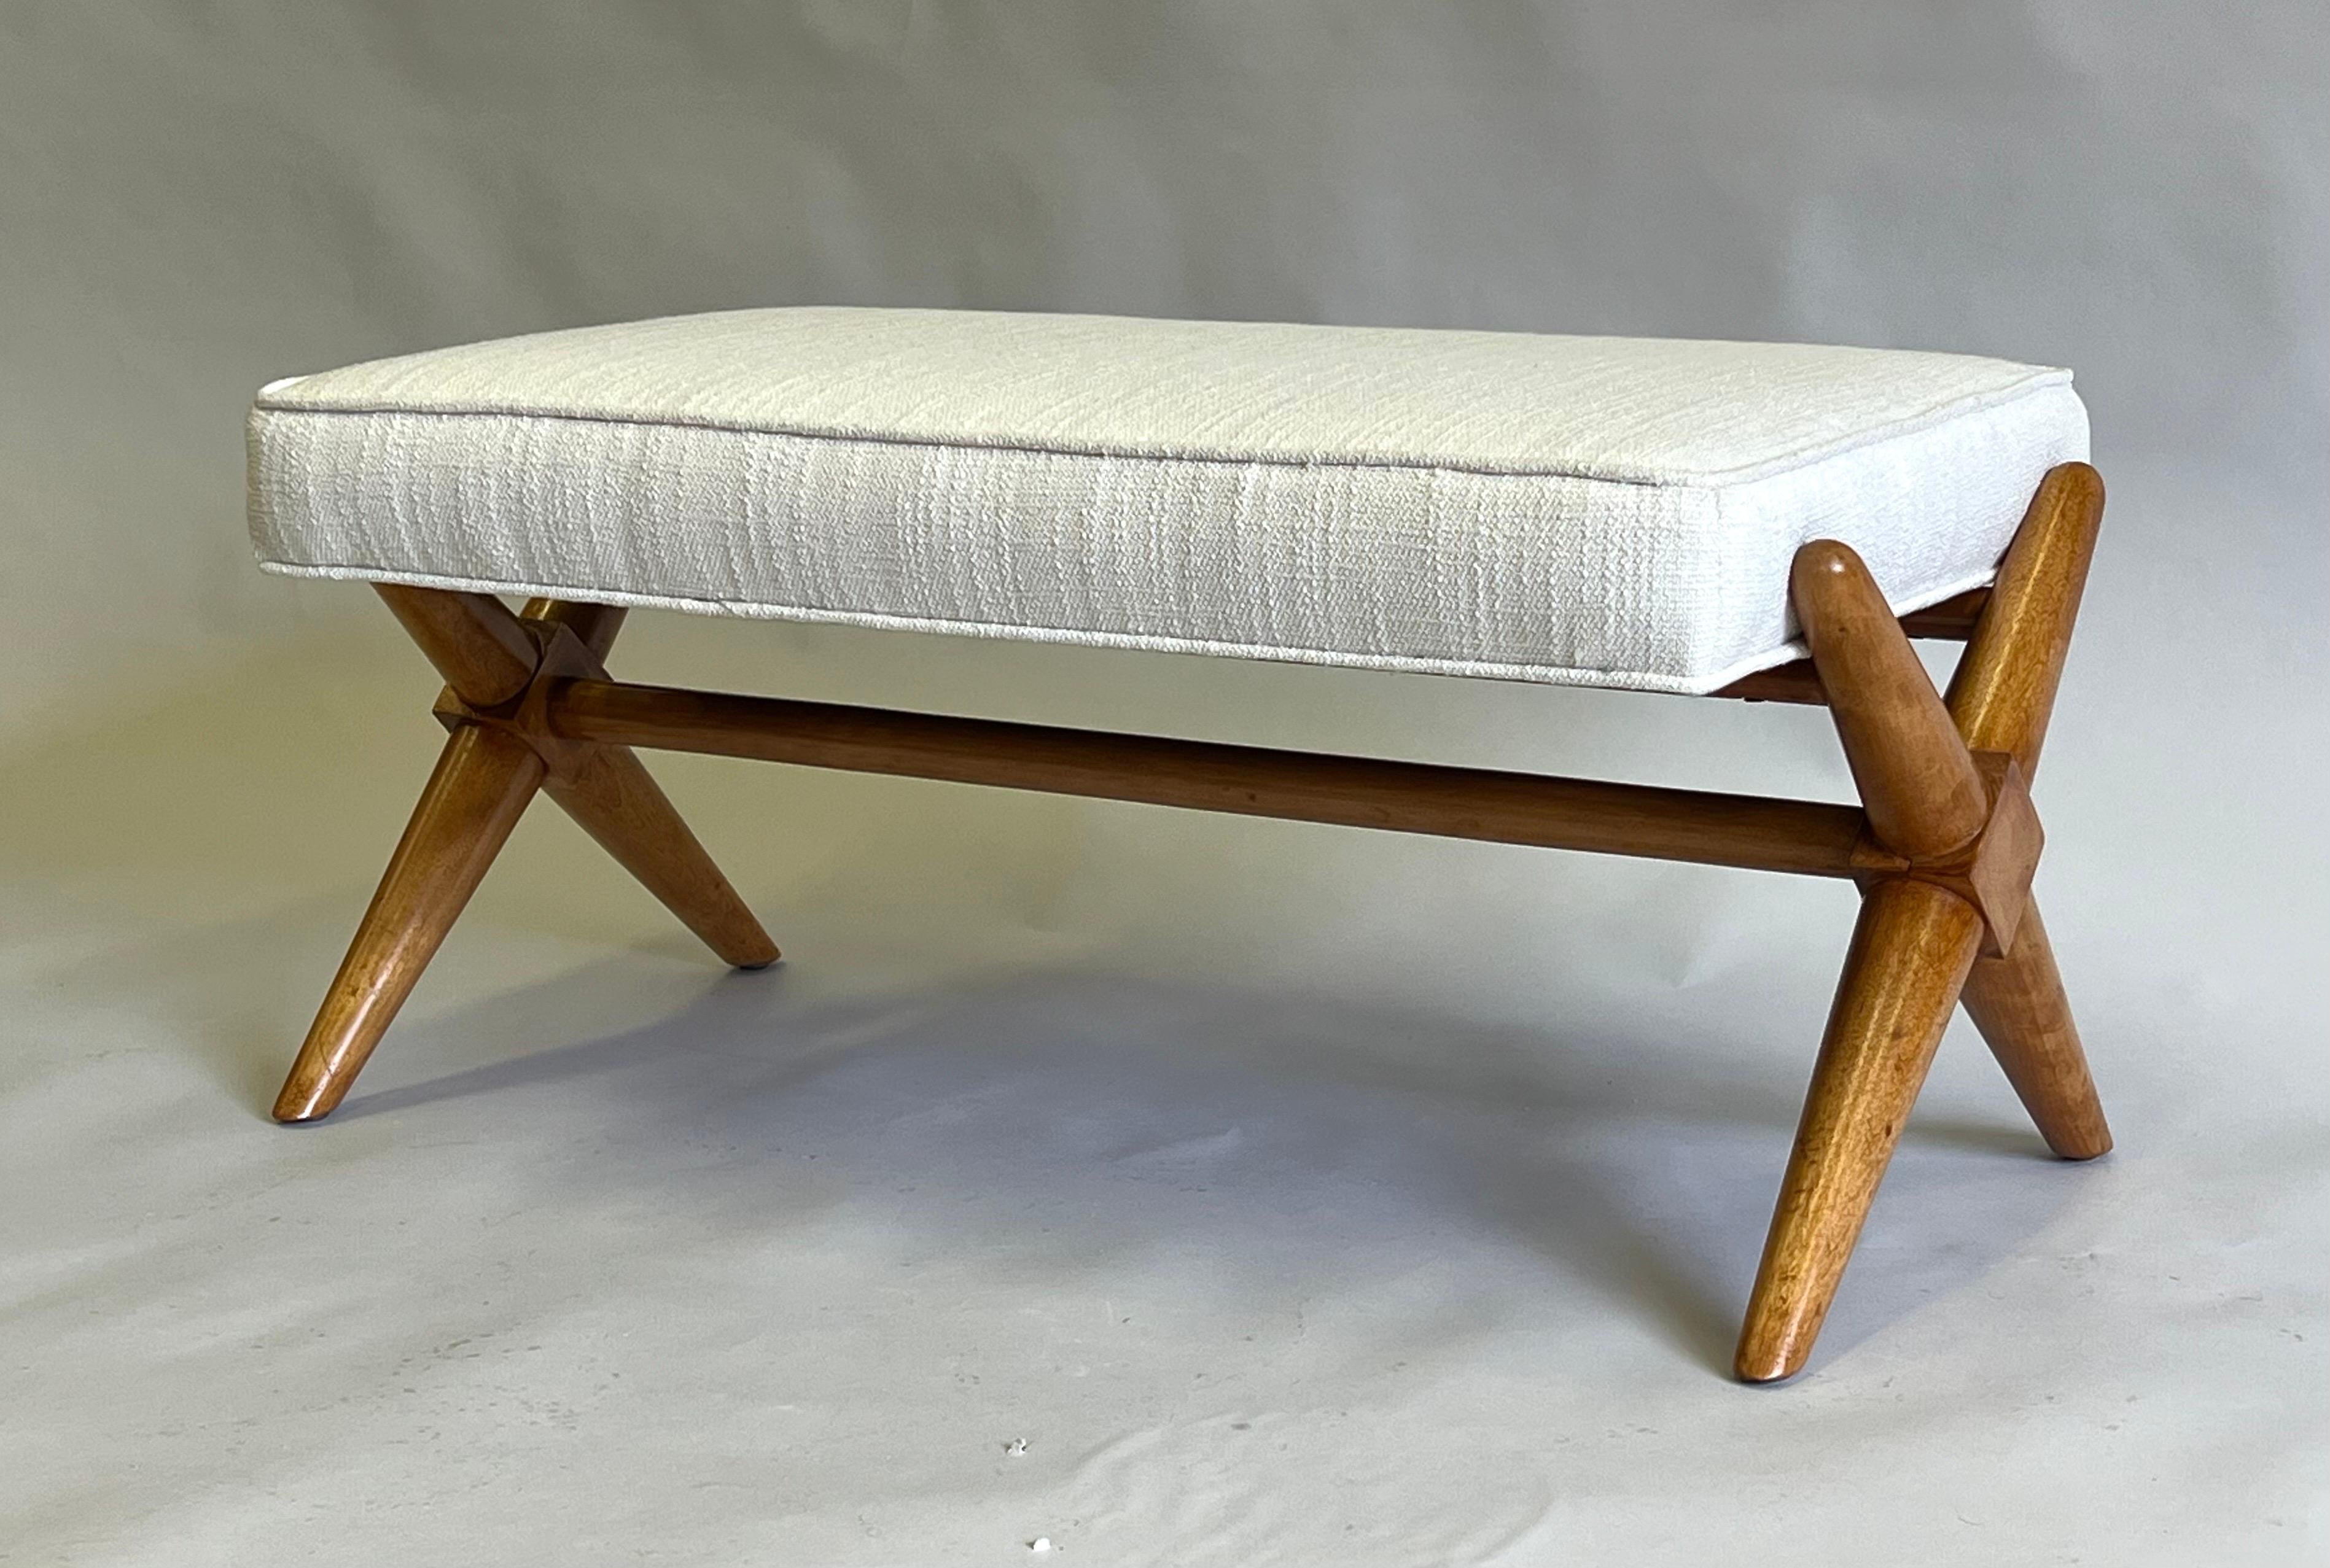 Hand-Carved Mid-Century Modern Neoclassical Hardwood Bench in the style of Jean-Michel Frank